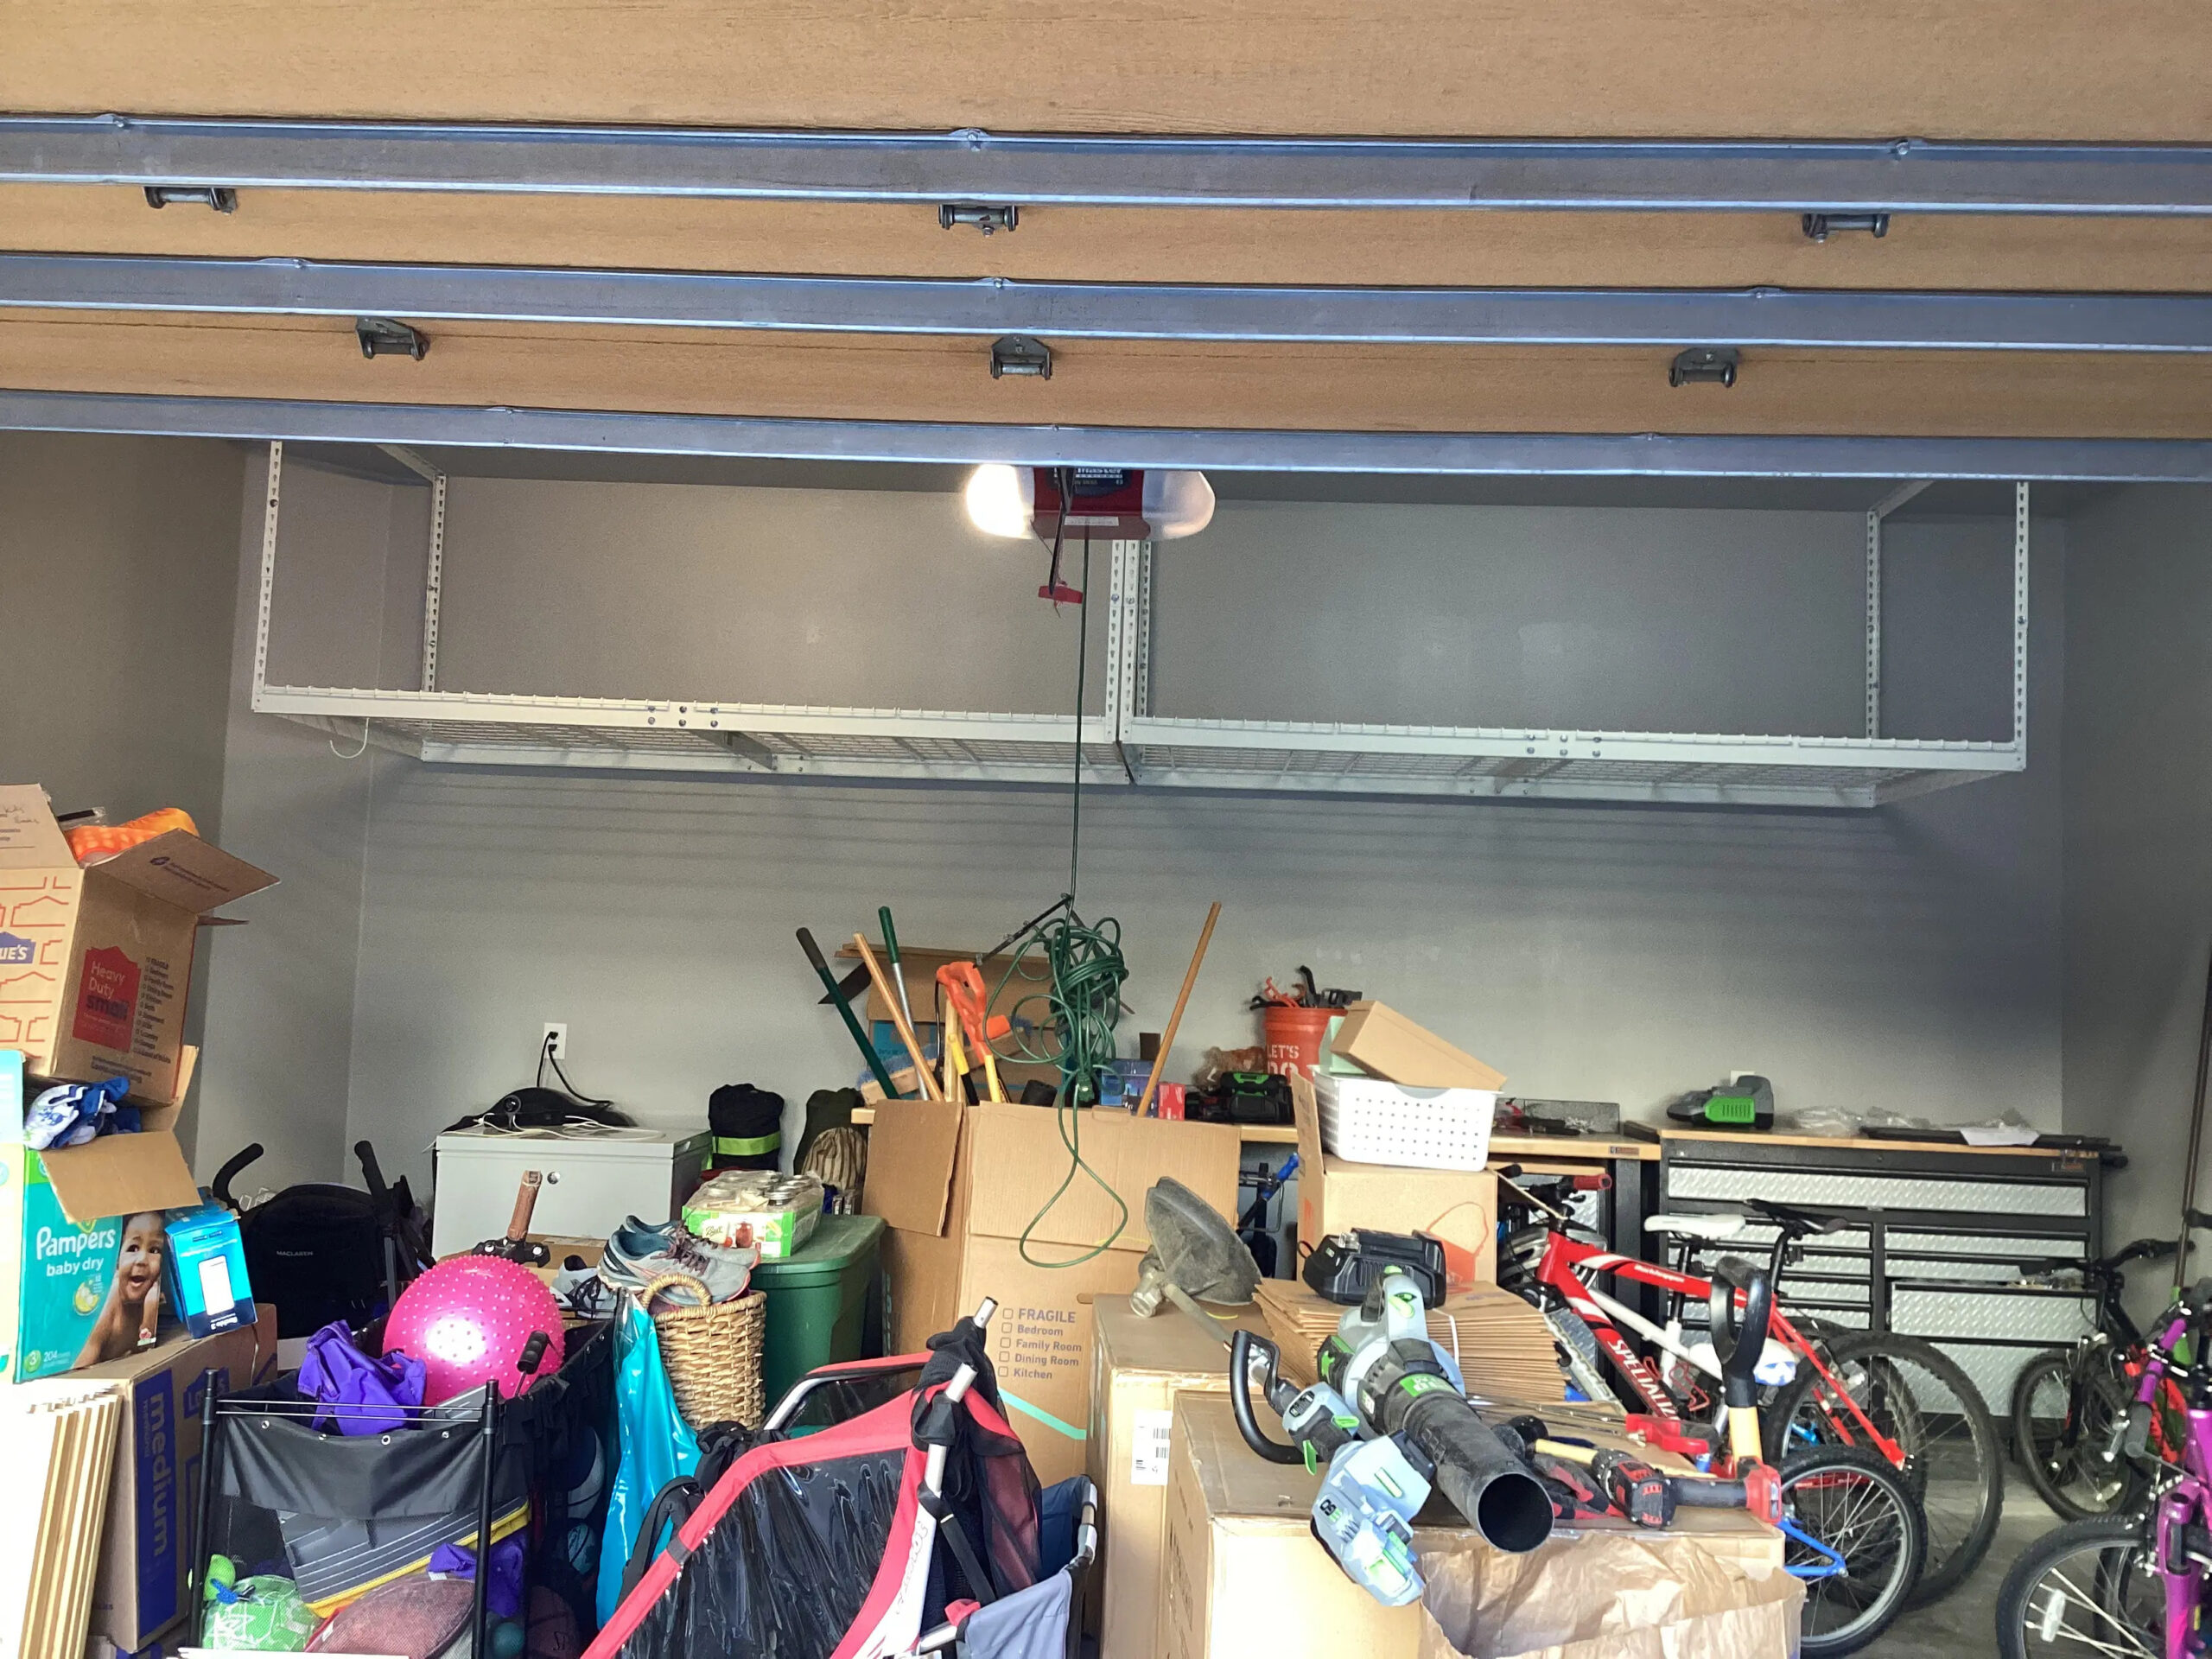 The Ultimate Guide to Organizing Your Garage - HDR Garage - Garage